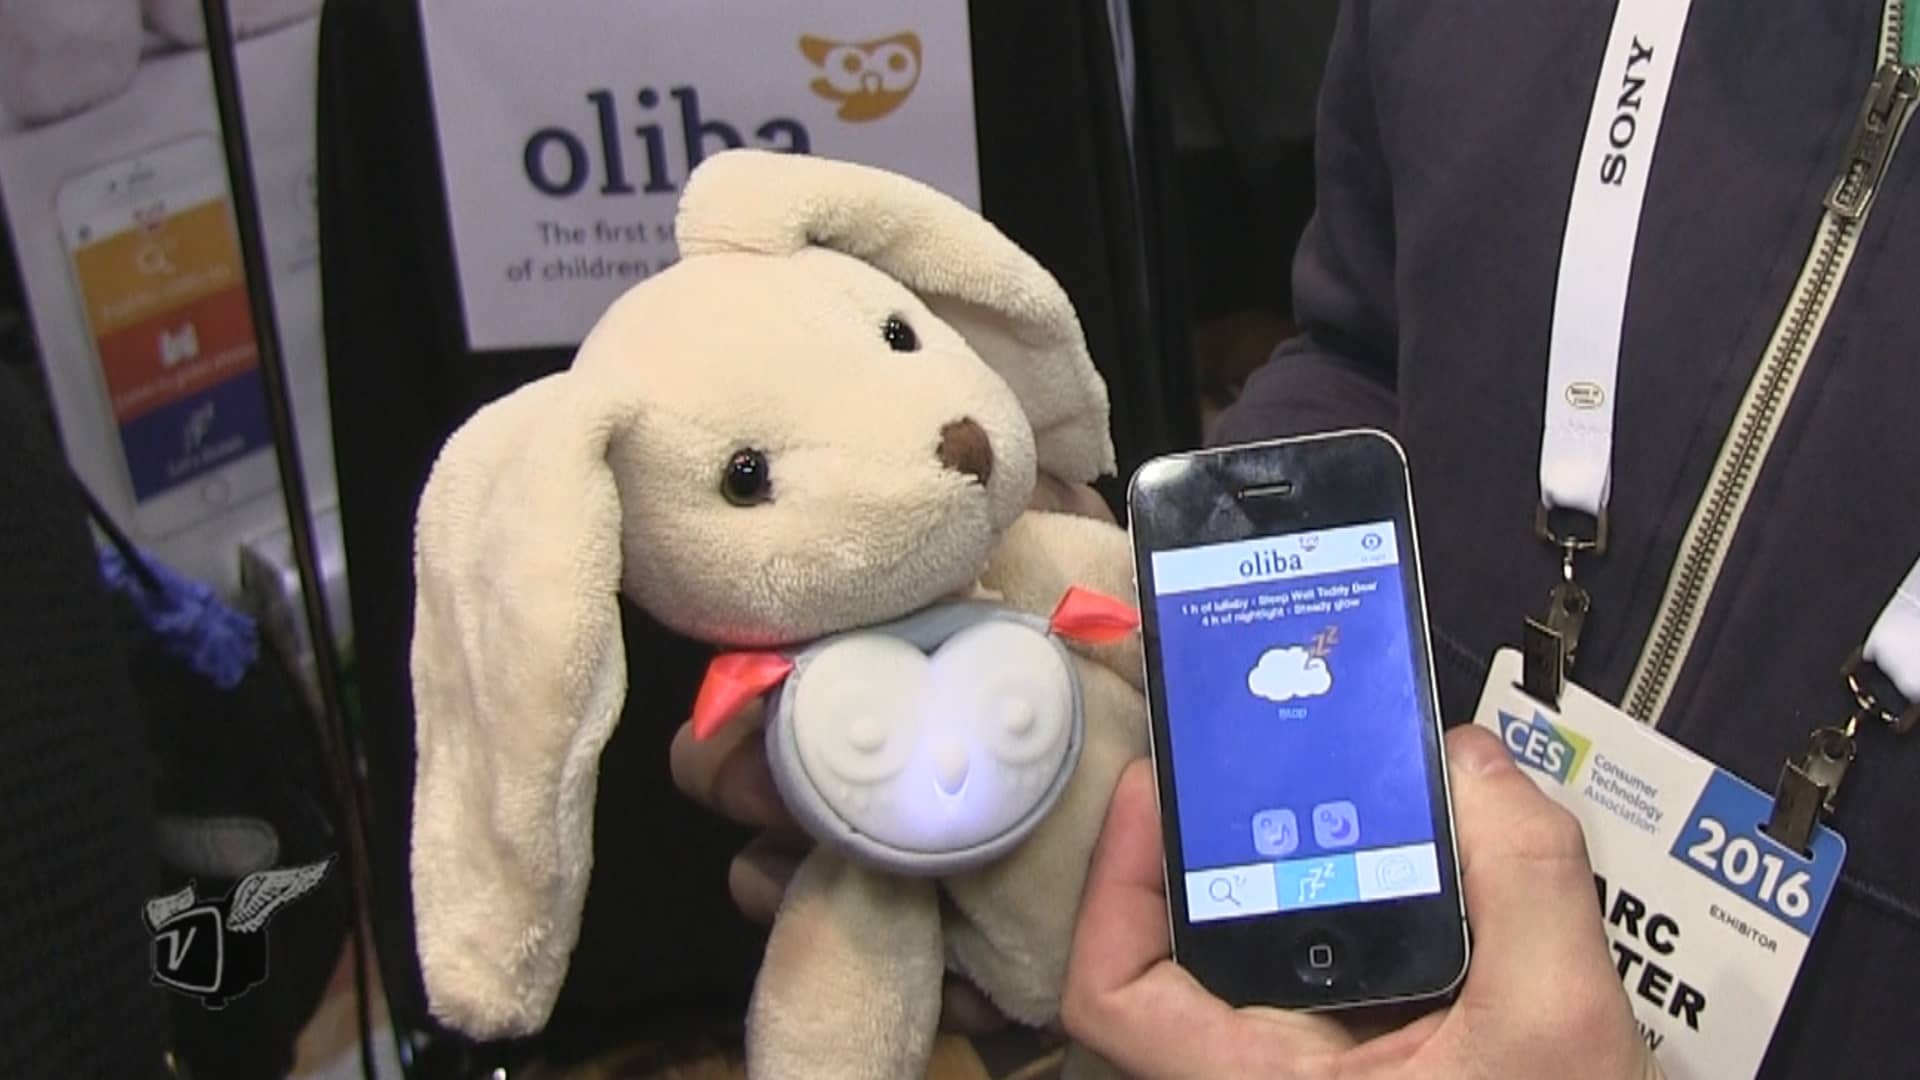 A Tag to Make a Cuddly Toy, Smart #CES2016